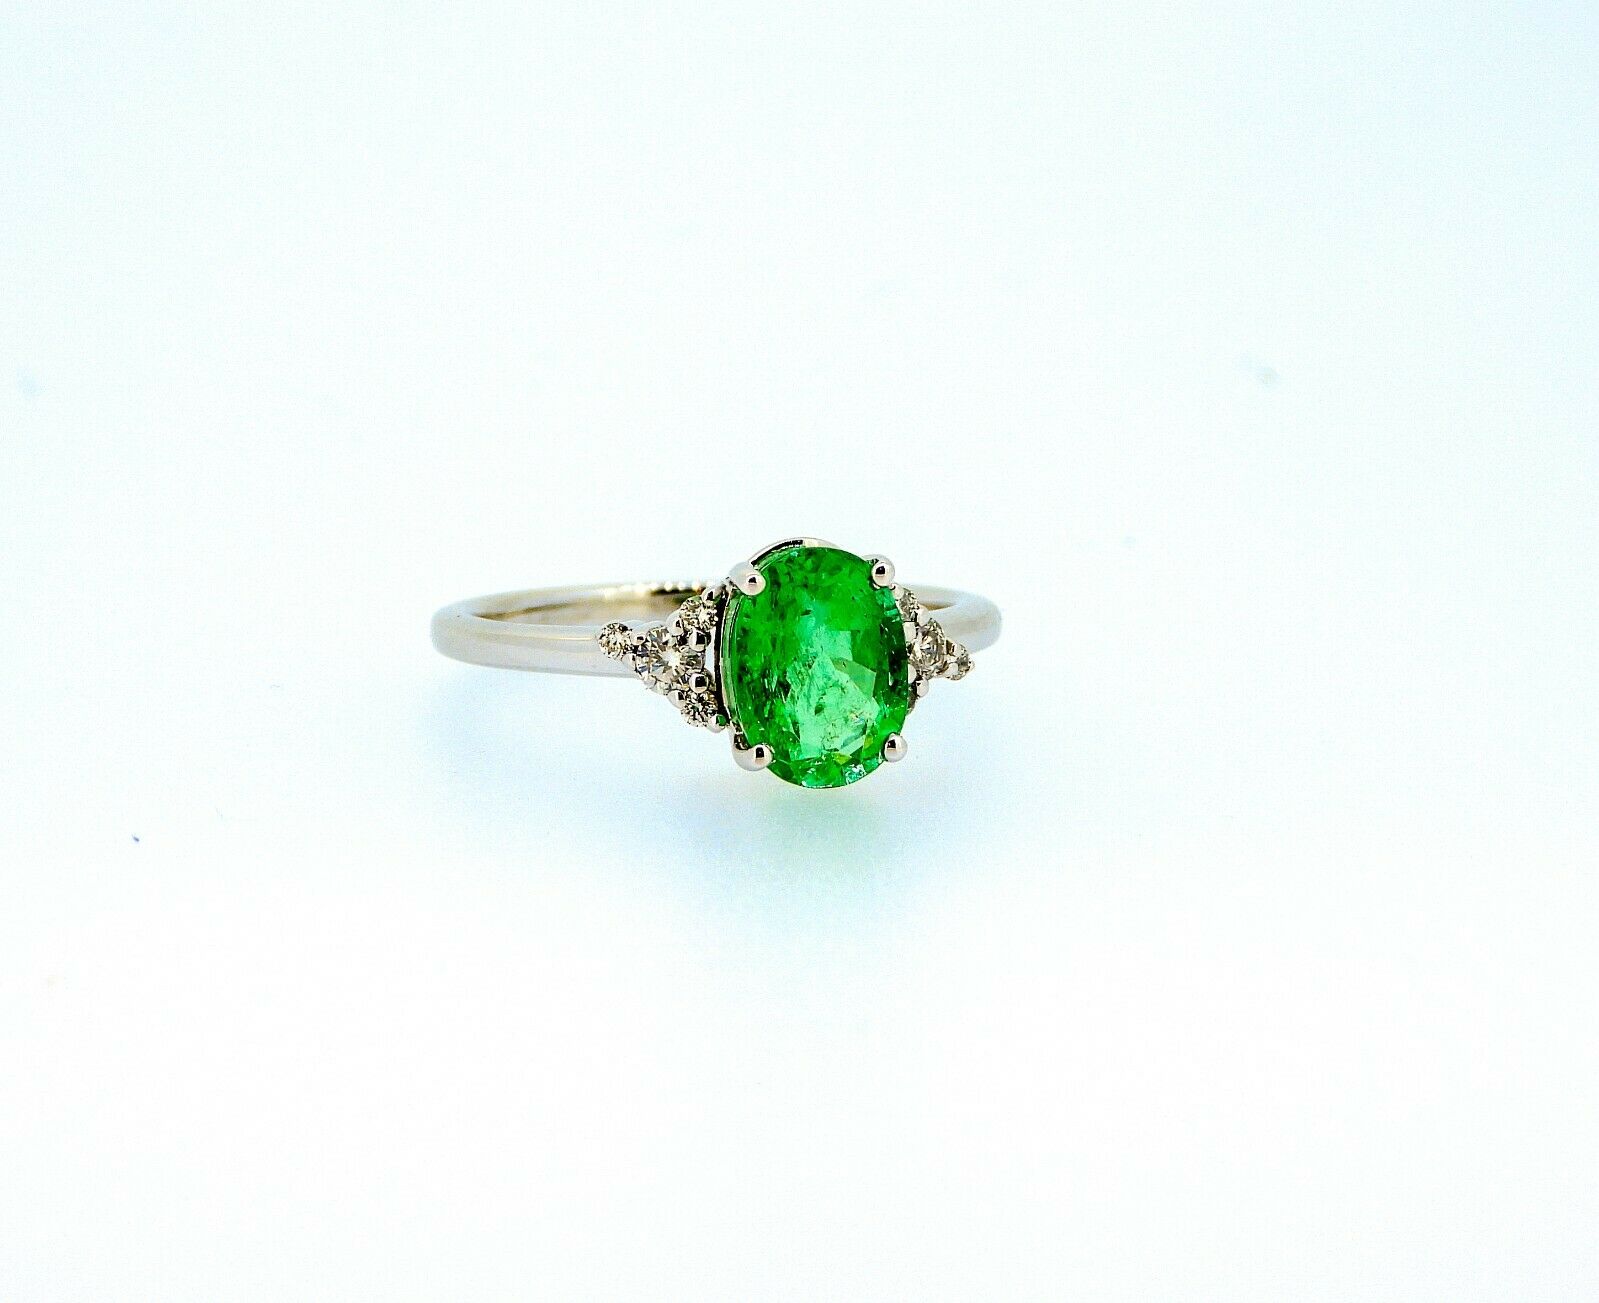 Certified 1.58 ct Natural High Quality Emerald and Diamonds 18K White Gold Ring - Image 5 of 6